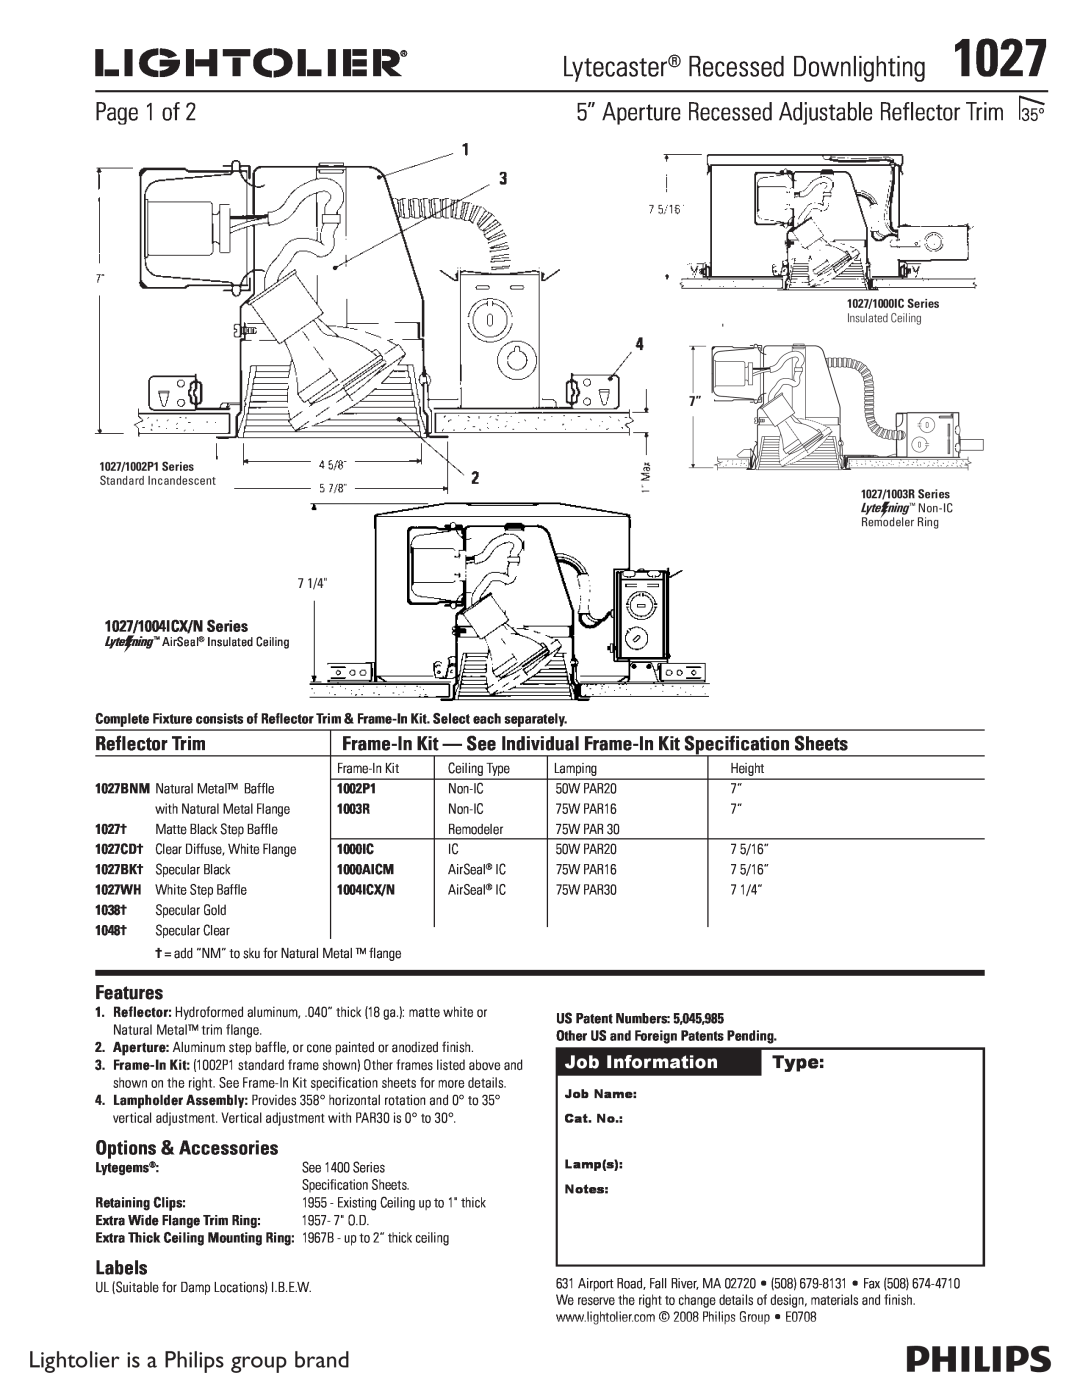 Lightolier specifications Page 1 of, Lightolier is a Philips group brand, Lytecaster Recessed Downlighting1027, Type 